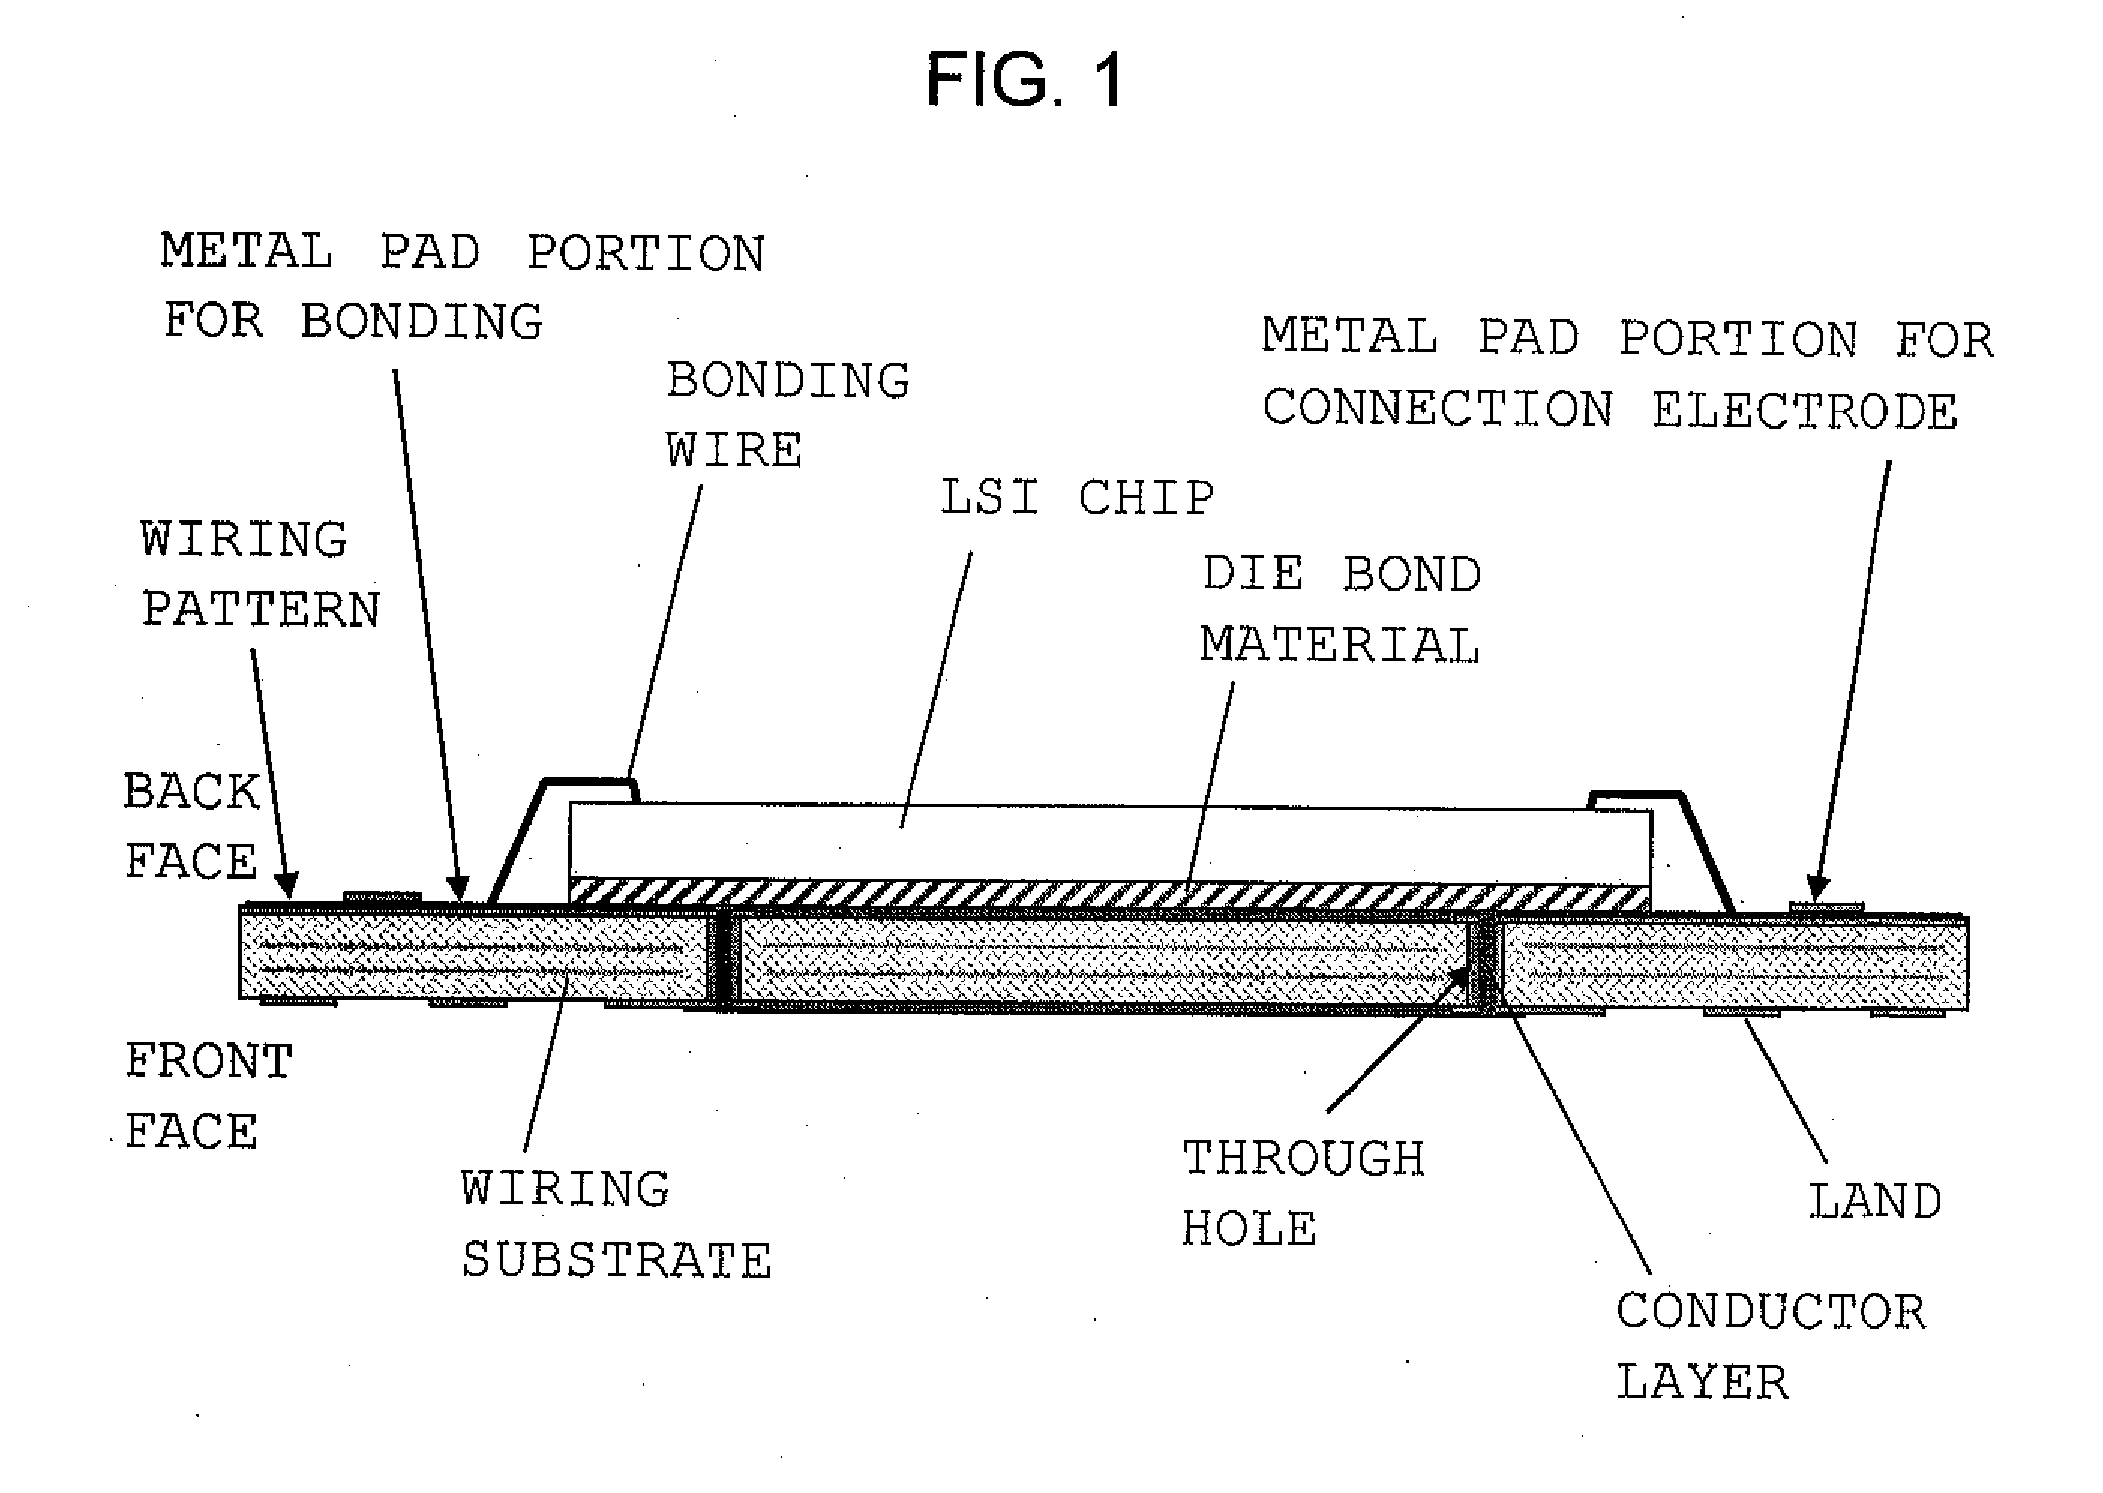 Three-dimensionally integrated semicondutor device and method for manufacturing the same